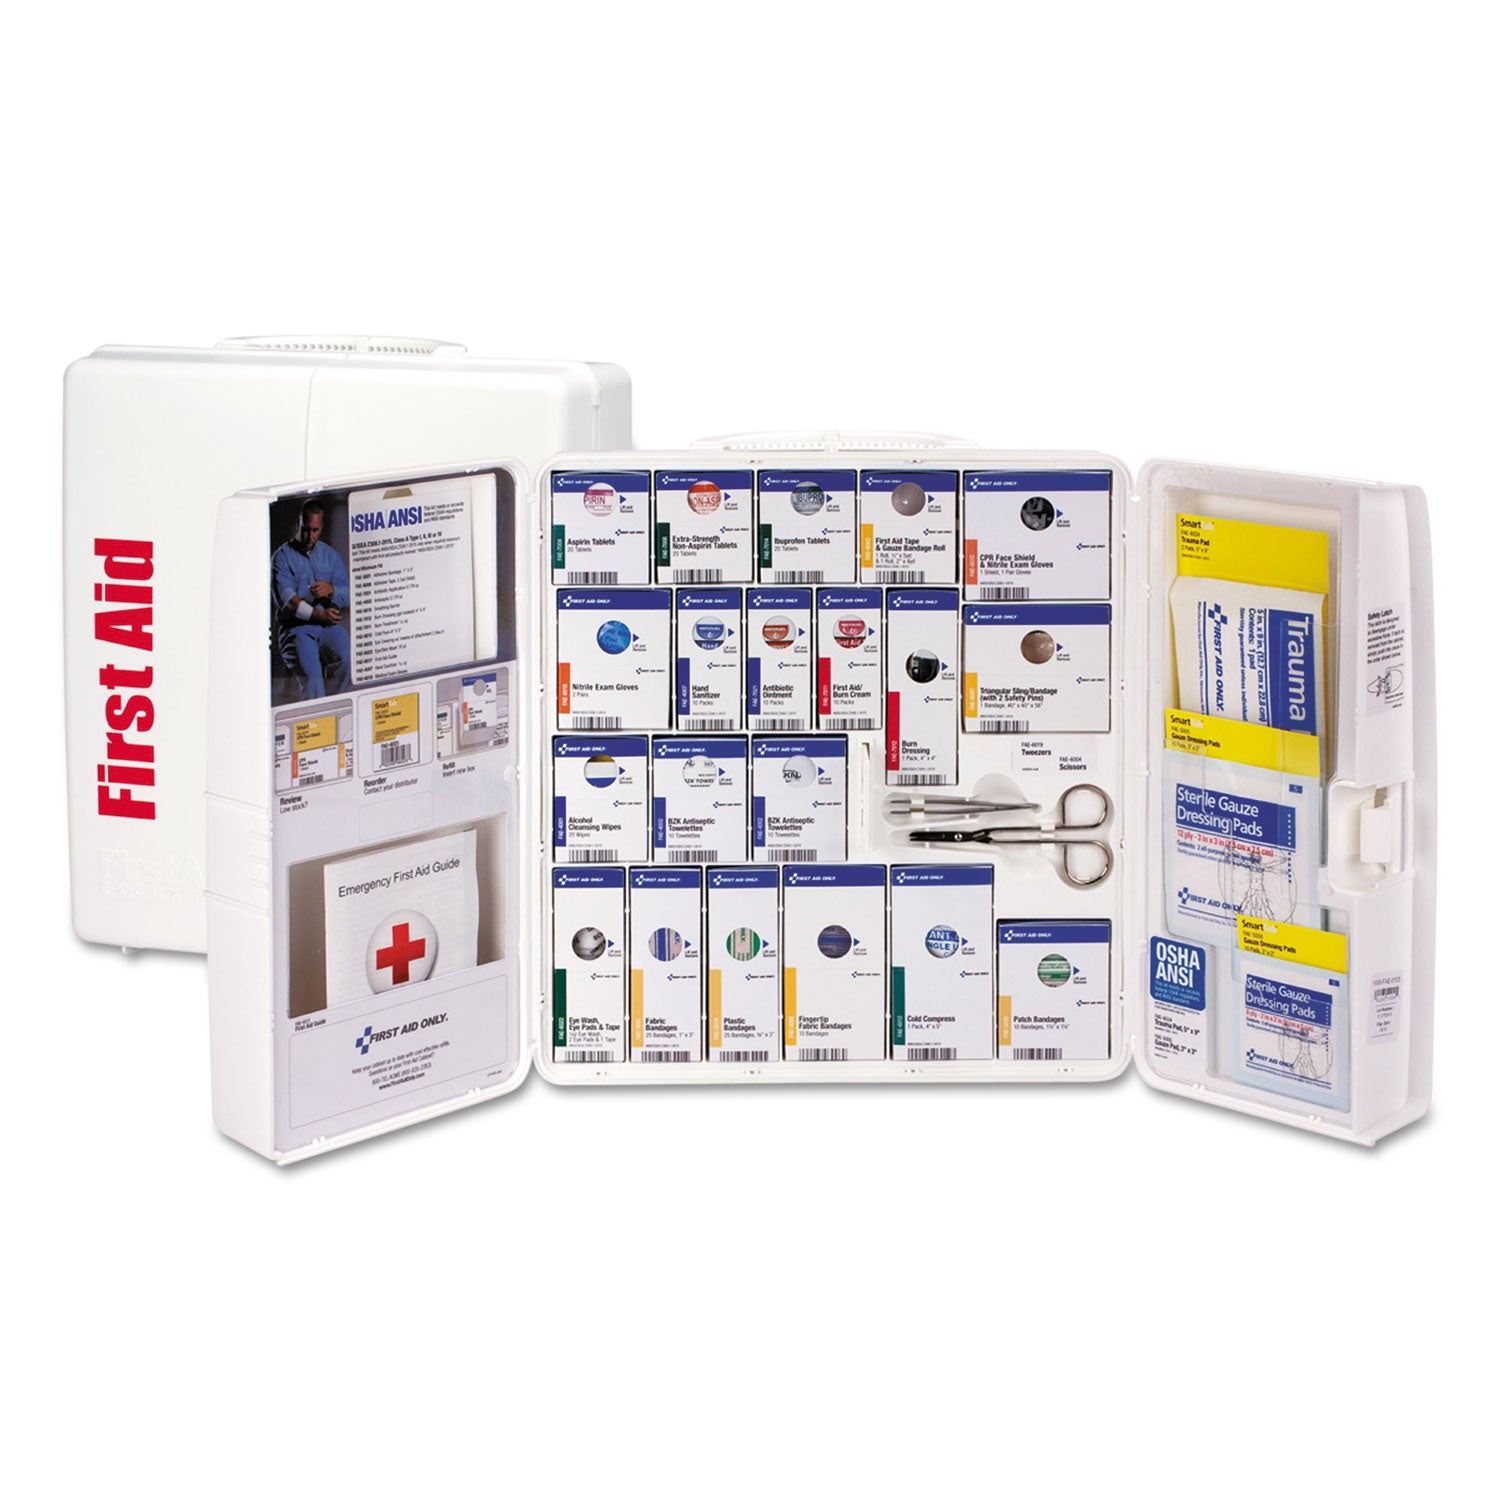 ansi-2015-smartcompliance-general-business-first-aid-station-class-a+-50-people-241-pieces_fao90608021 - 1